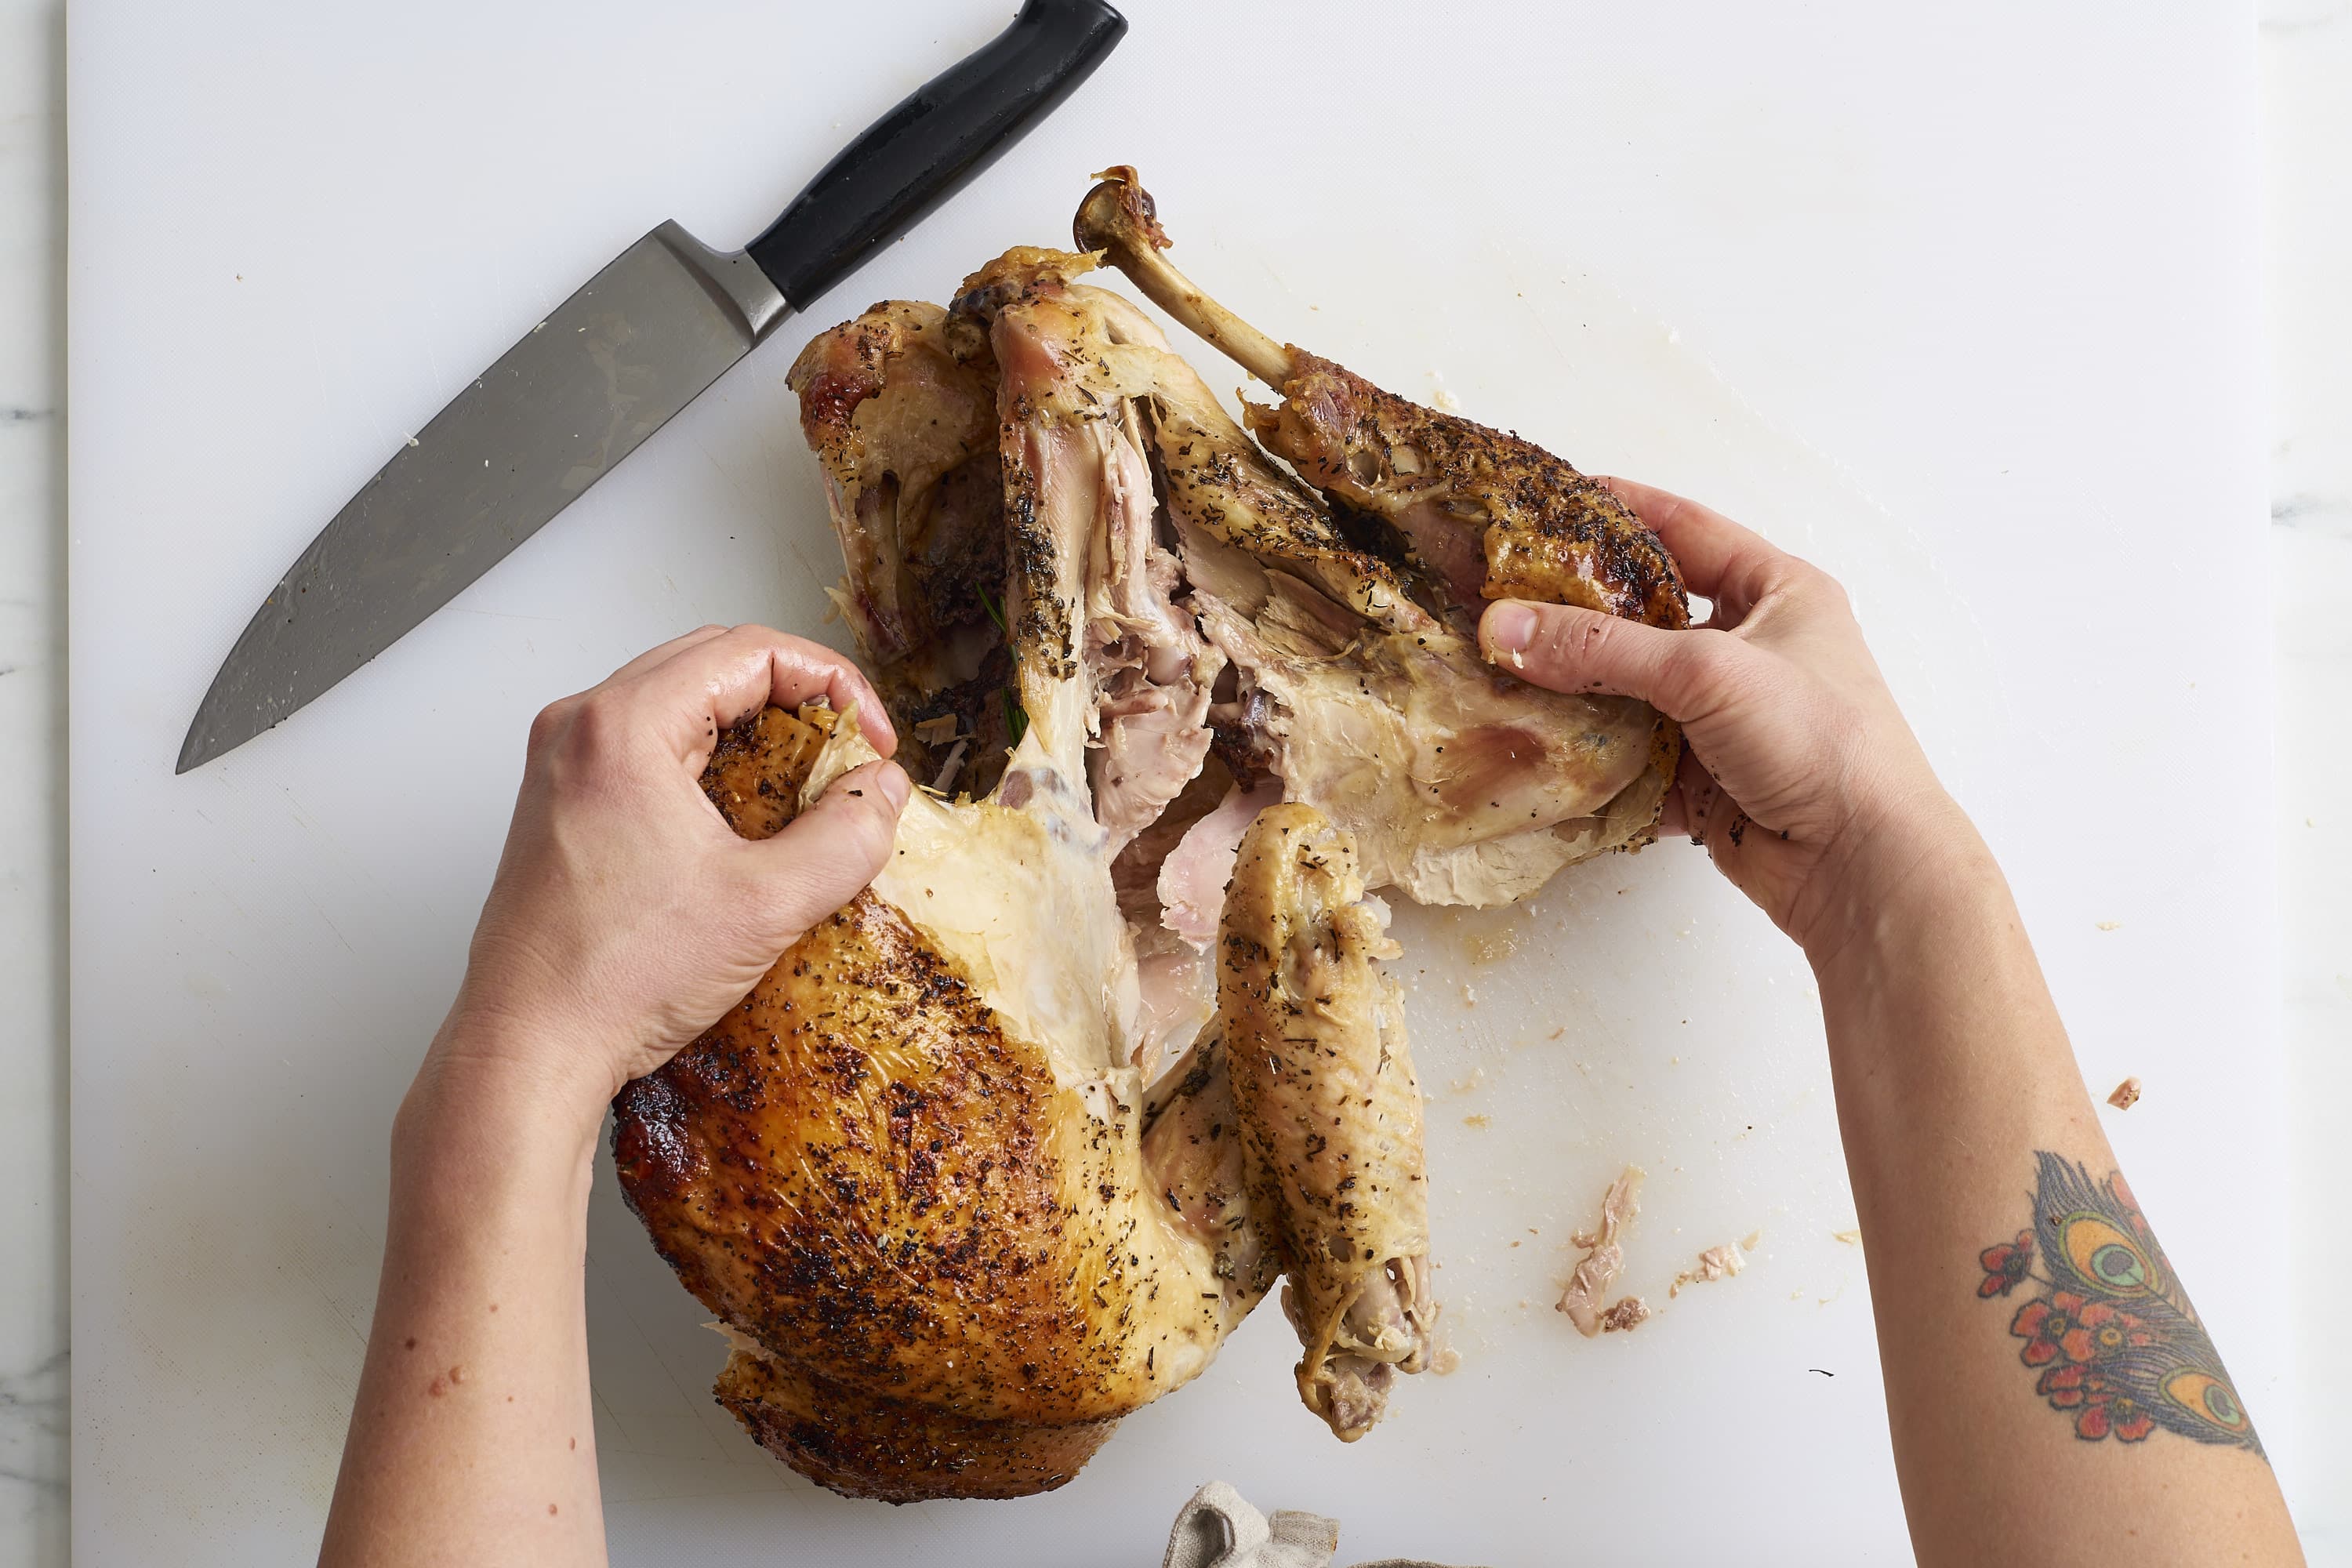 The Best Knives For Carving A Turkey, According To Chefs